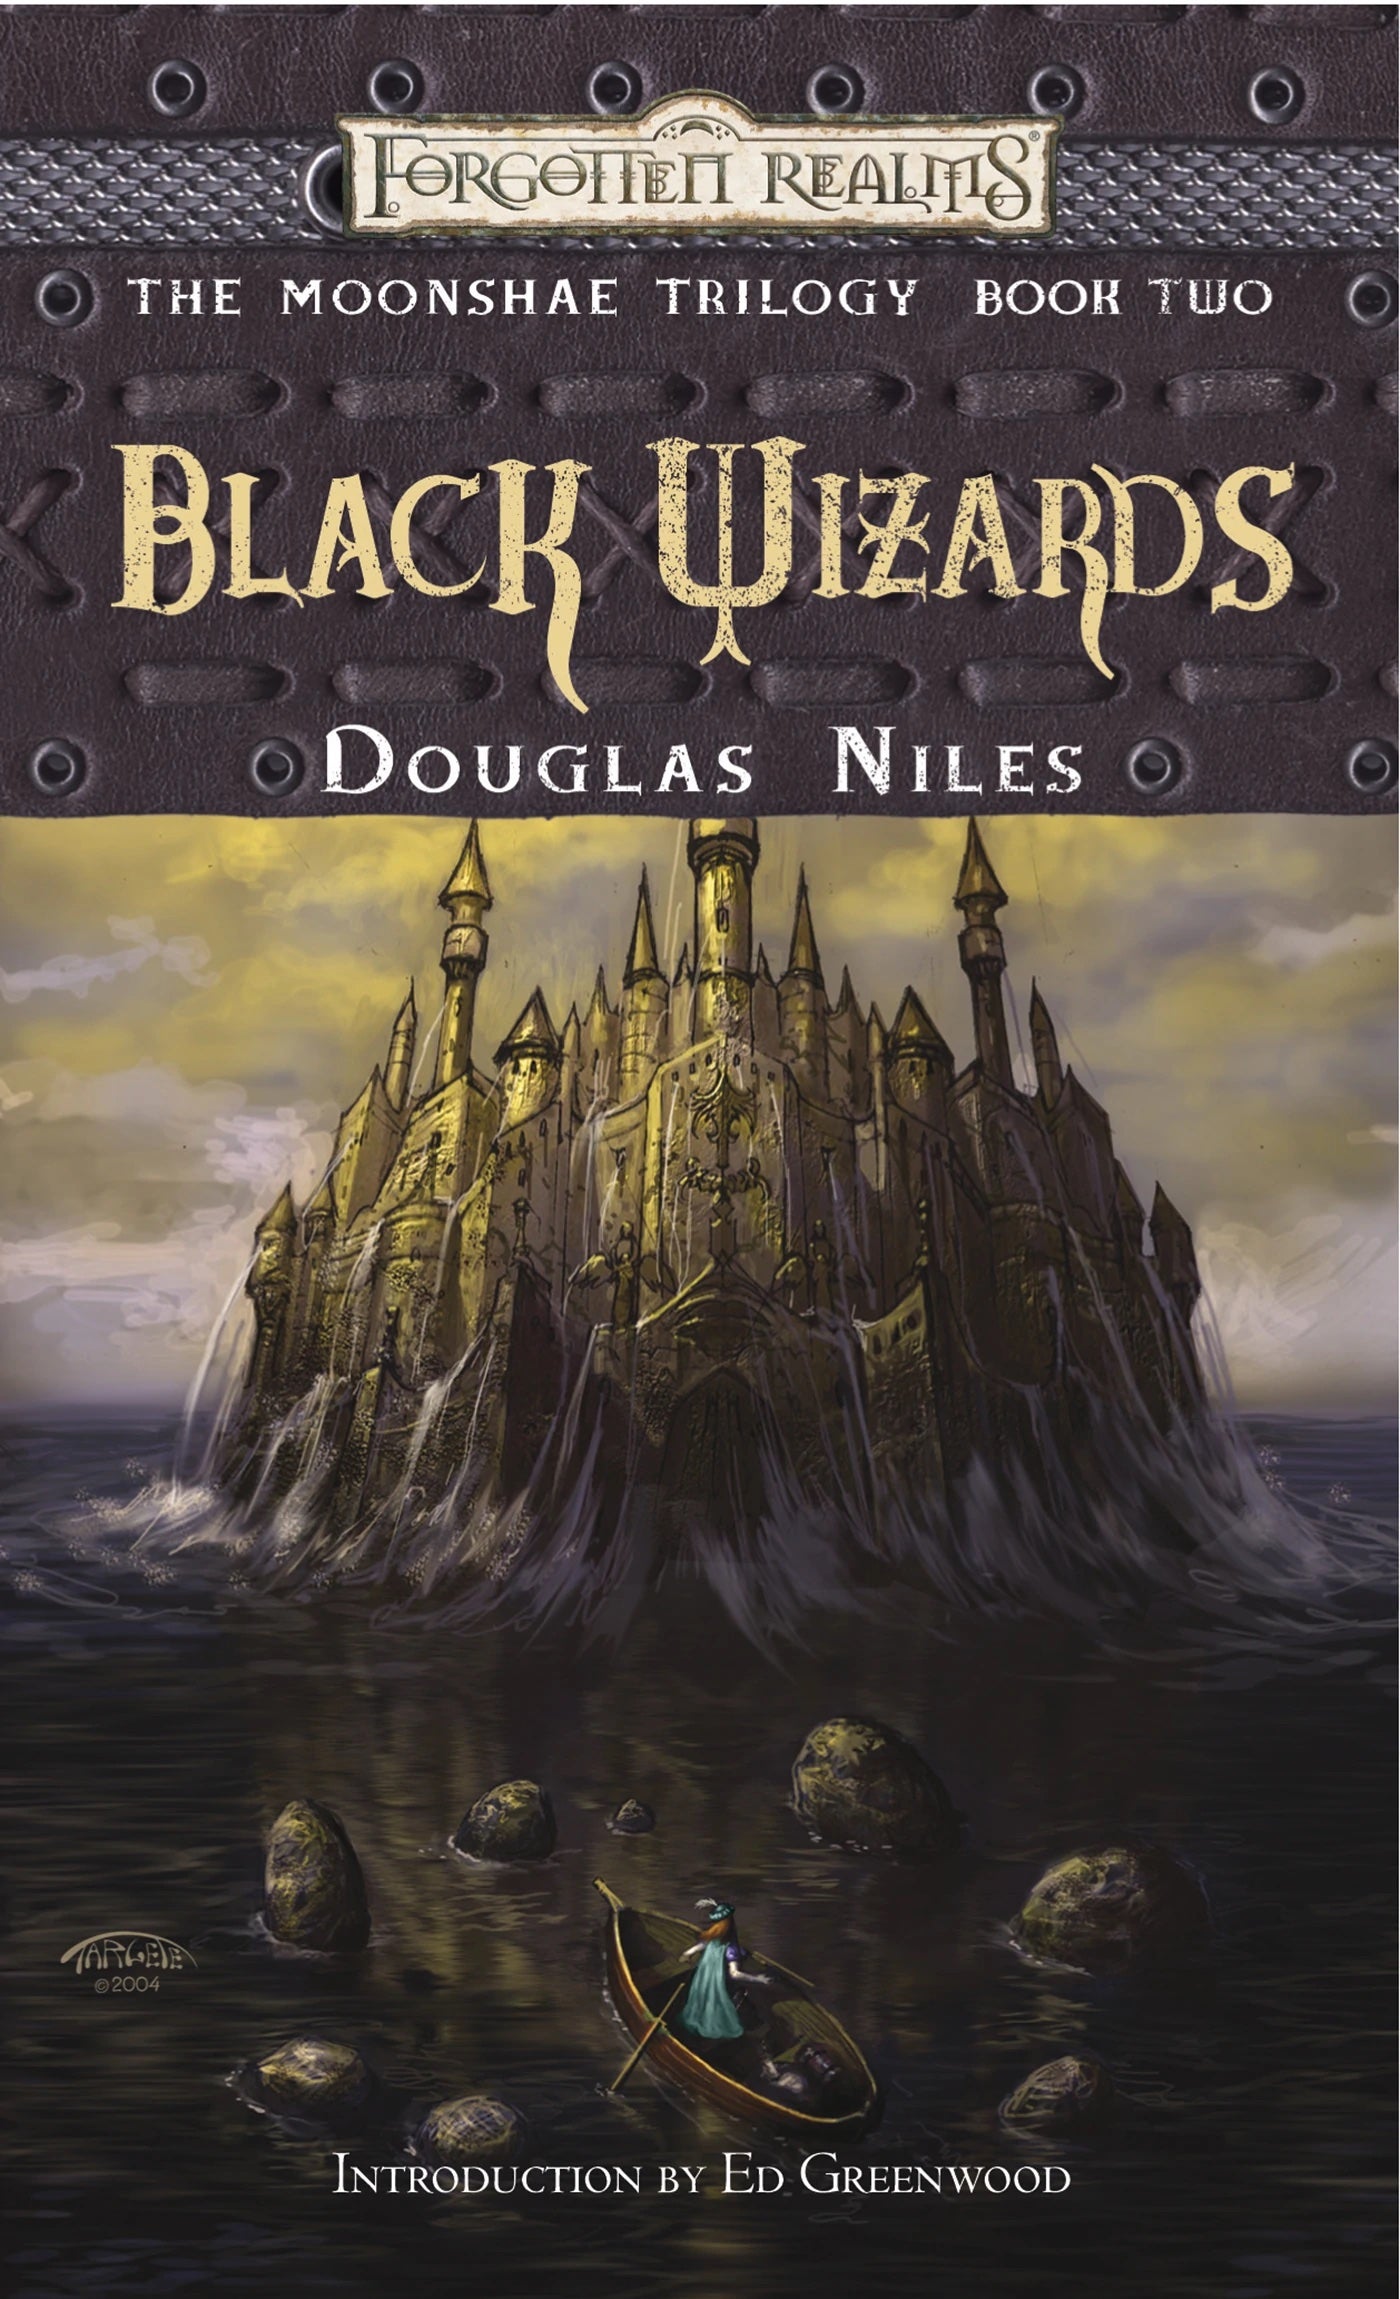 J.P. Targete's full cover to the 2011 reprint of Black Wizards. (Image: Wizards of the Coast)